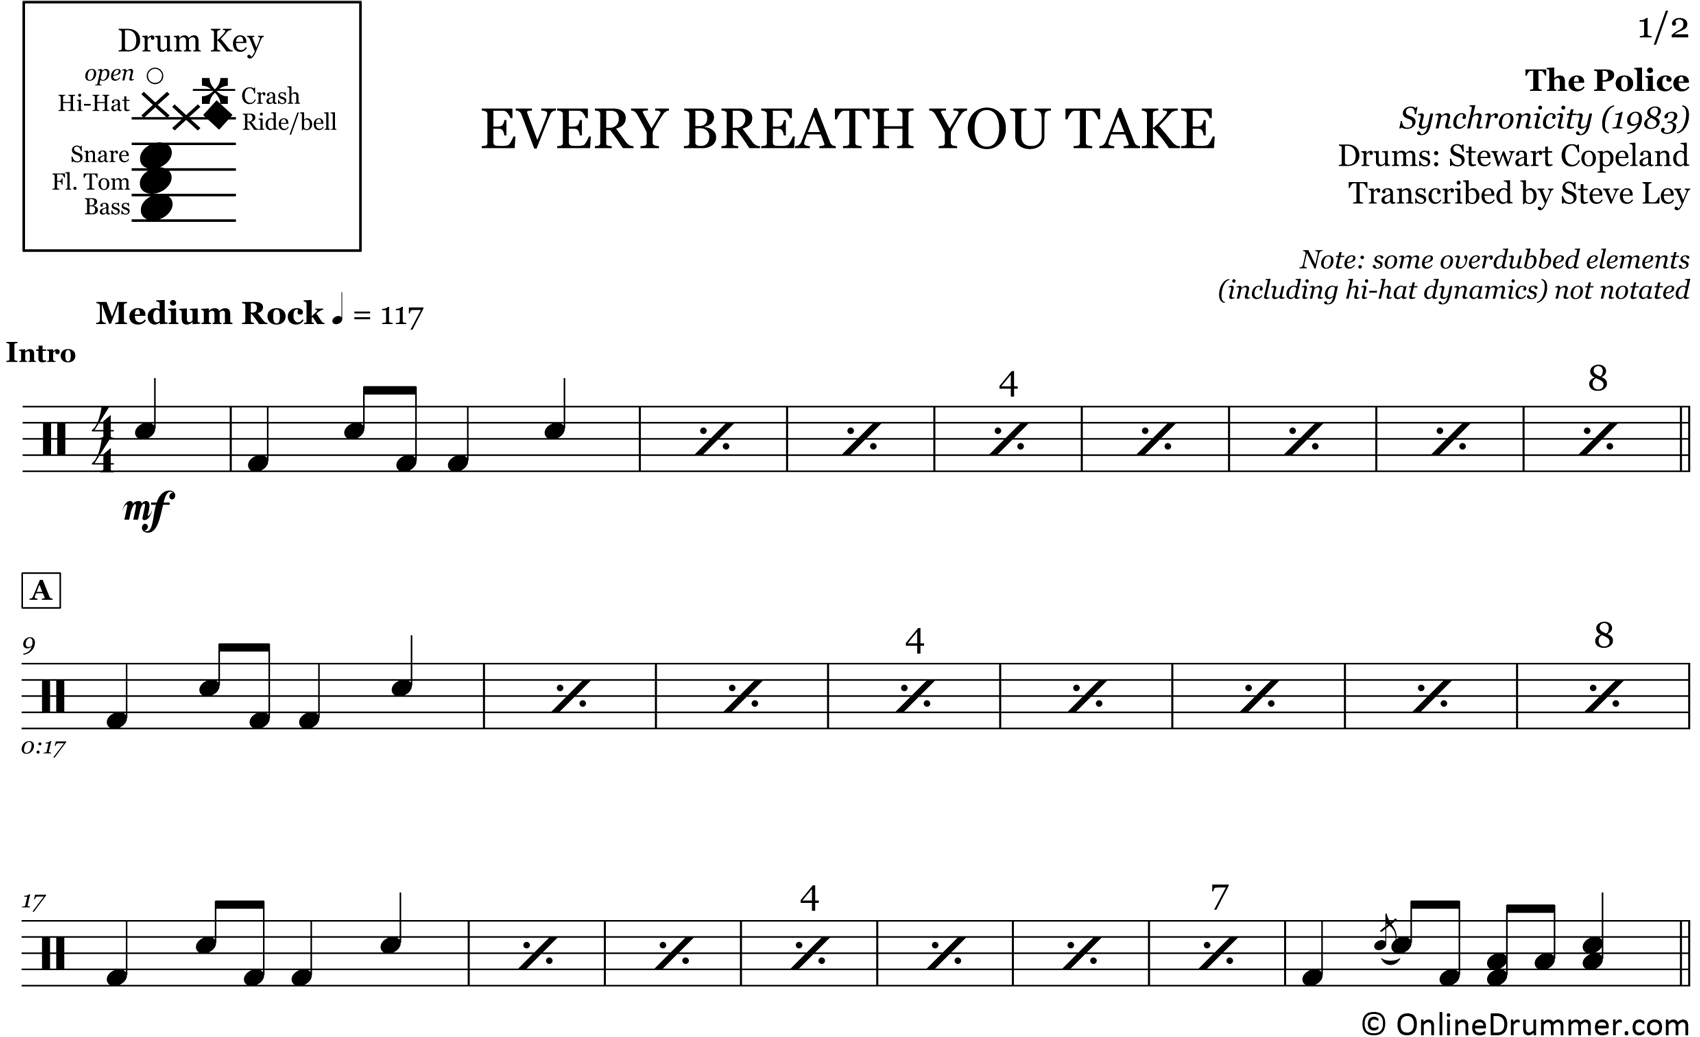 Every Breath You Take - The Police - Drum Sheet Music